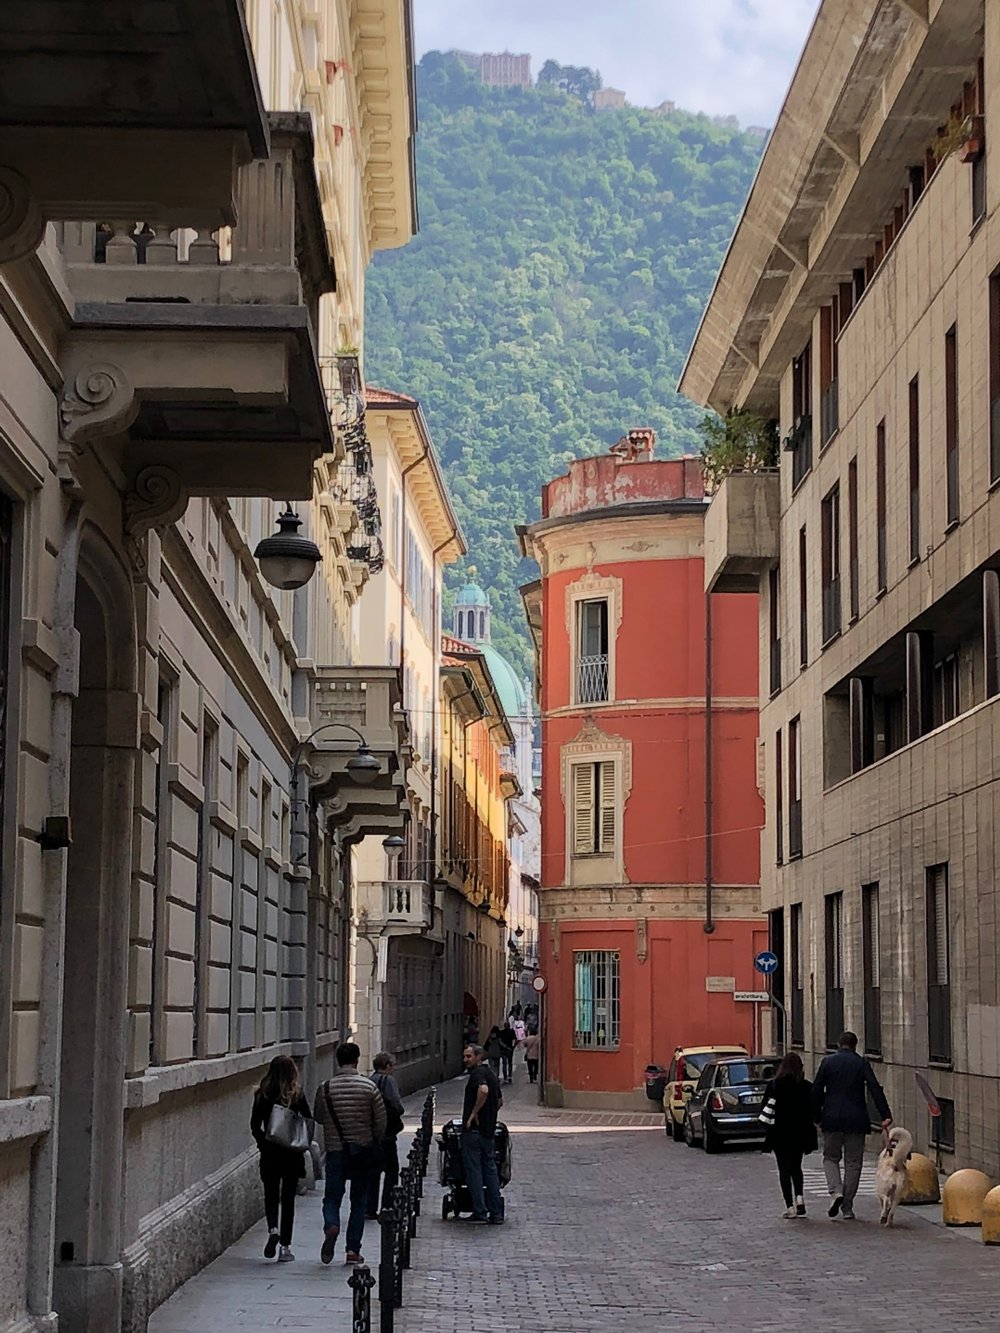 A street view in Como